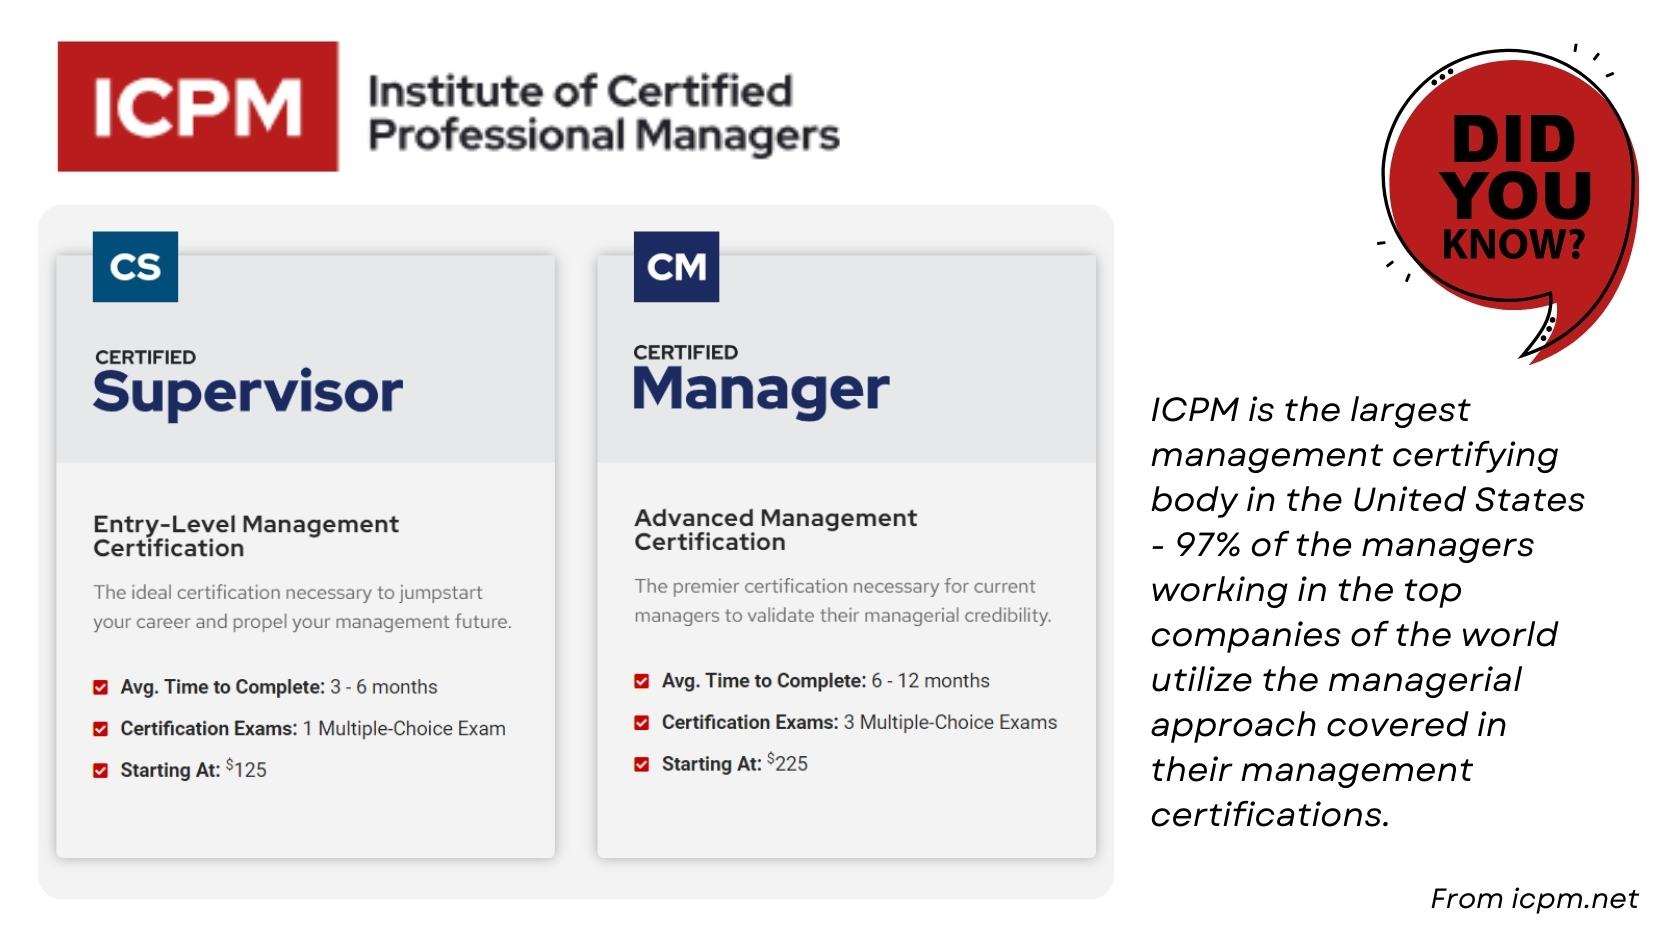 ICPM Certified Manager (CM) and Certified Supervisor (CS) program details and benefits.